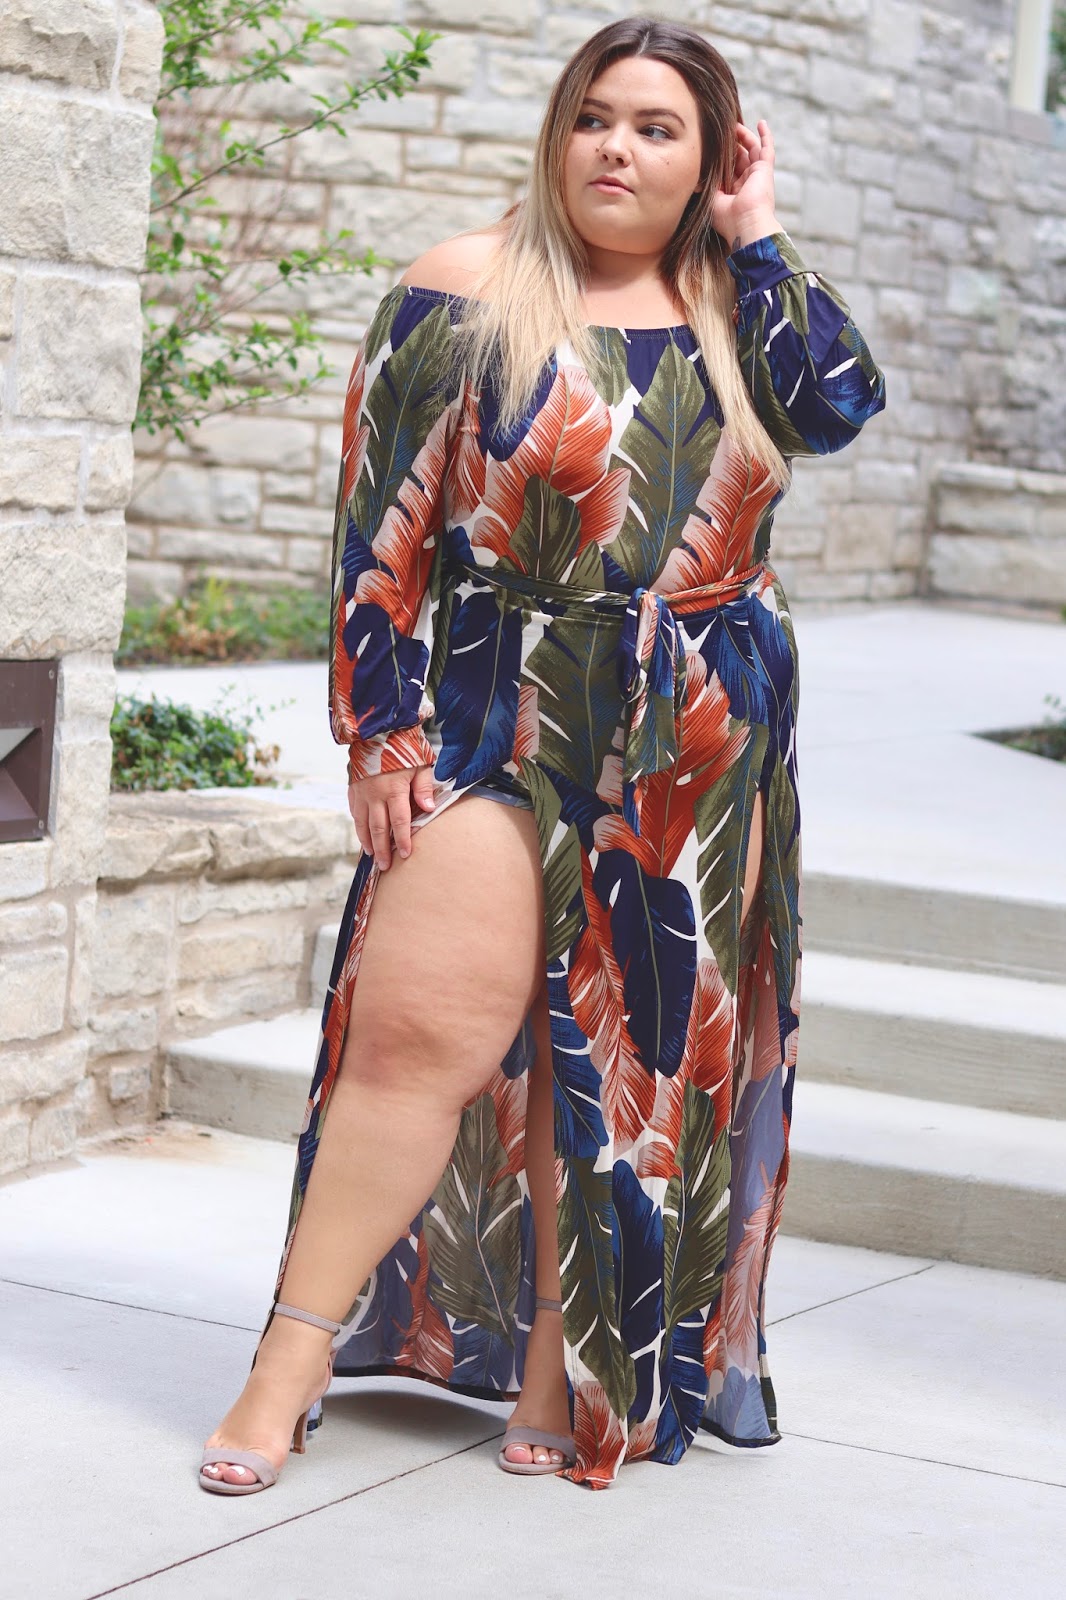 natalie in the city, fashion nova, fashion nova curve, blogger review, slit maxi, maxi dress, plus size clothing, affordable plus size clothes, fashion nova discount code, plus size maxi dresses, off the shoulder trend, summer 2017, curves and confidence, embrace your curves, eff your beauty standards, Chicago blogger, midwest blogger, plus size fashion blogger, plus size fashion blog